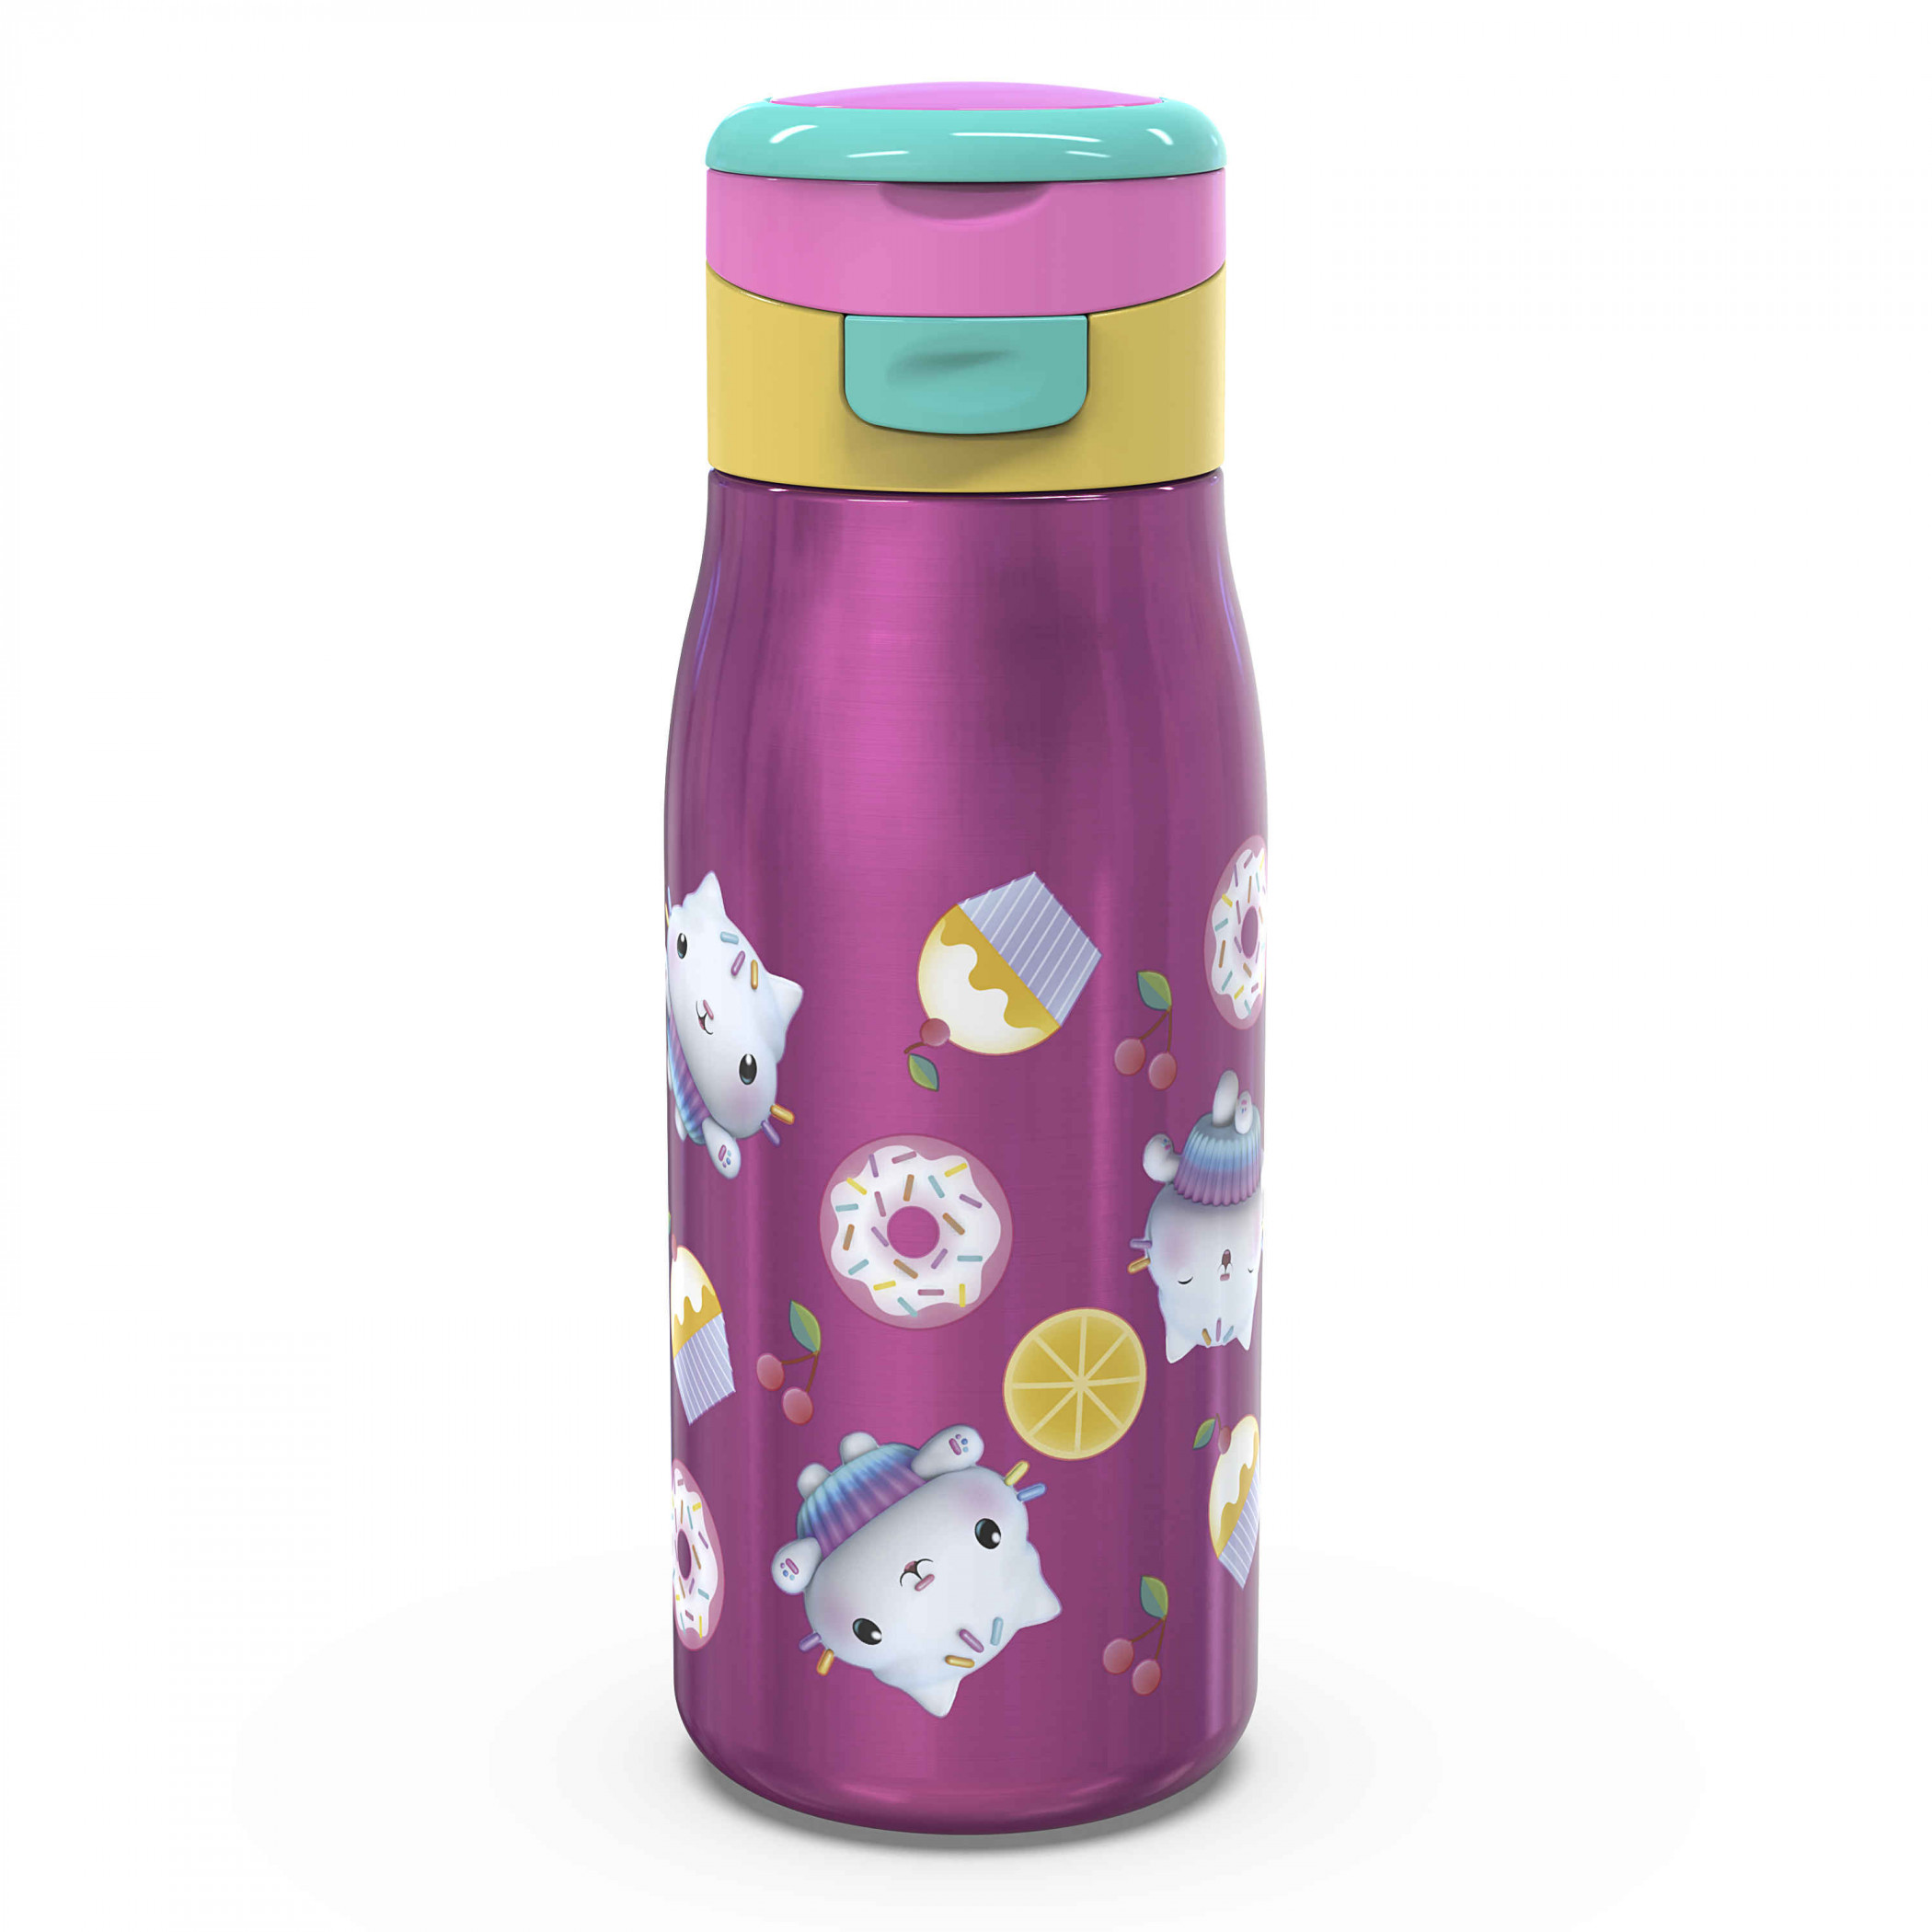 Gabby's Dollhouse 13.5oz Stainless Steel Double Walled Water Bottle